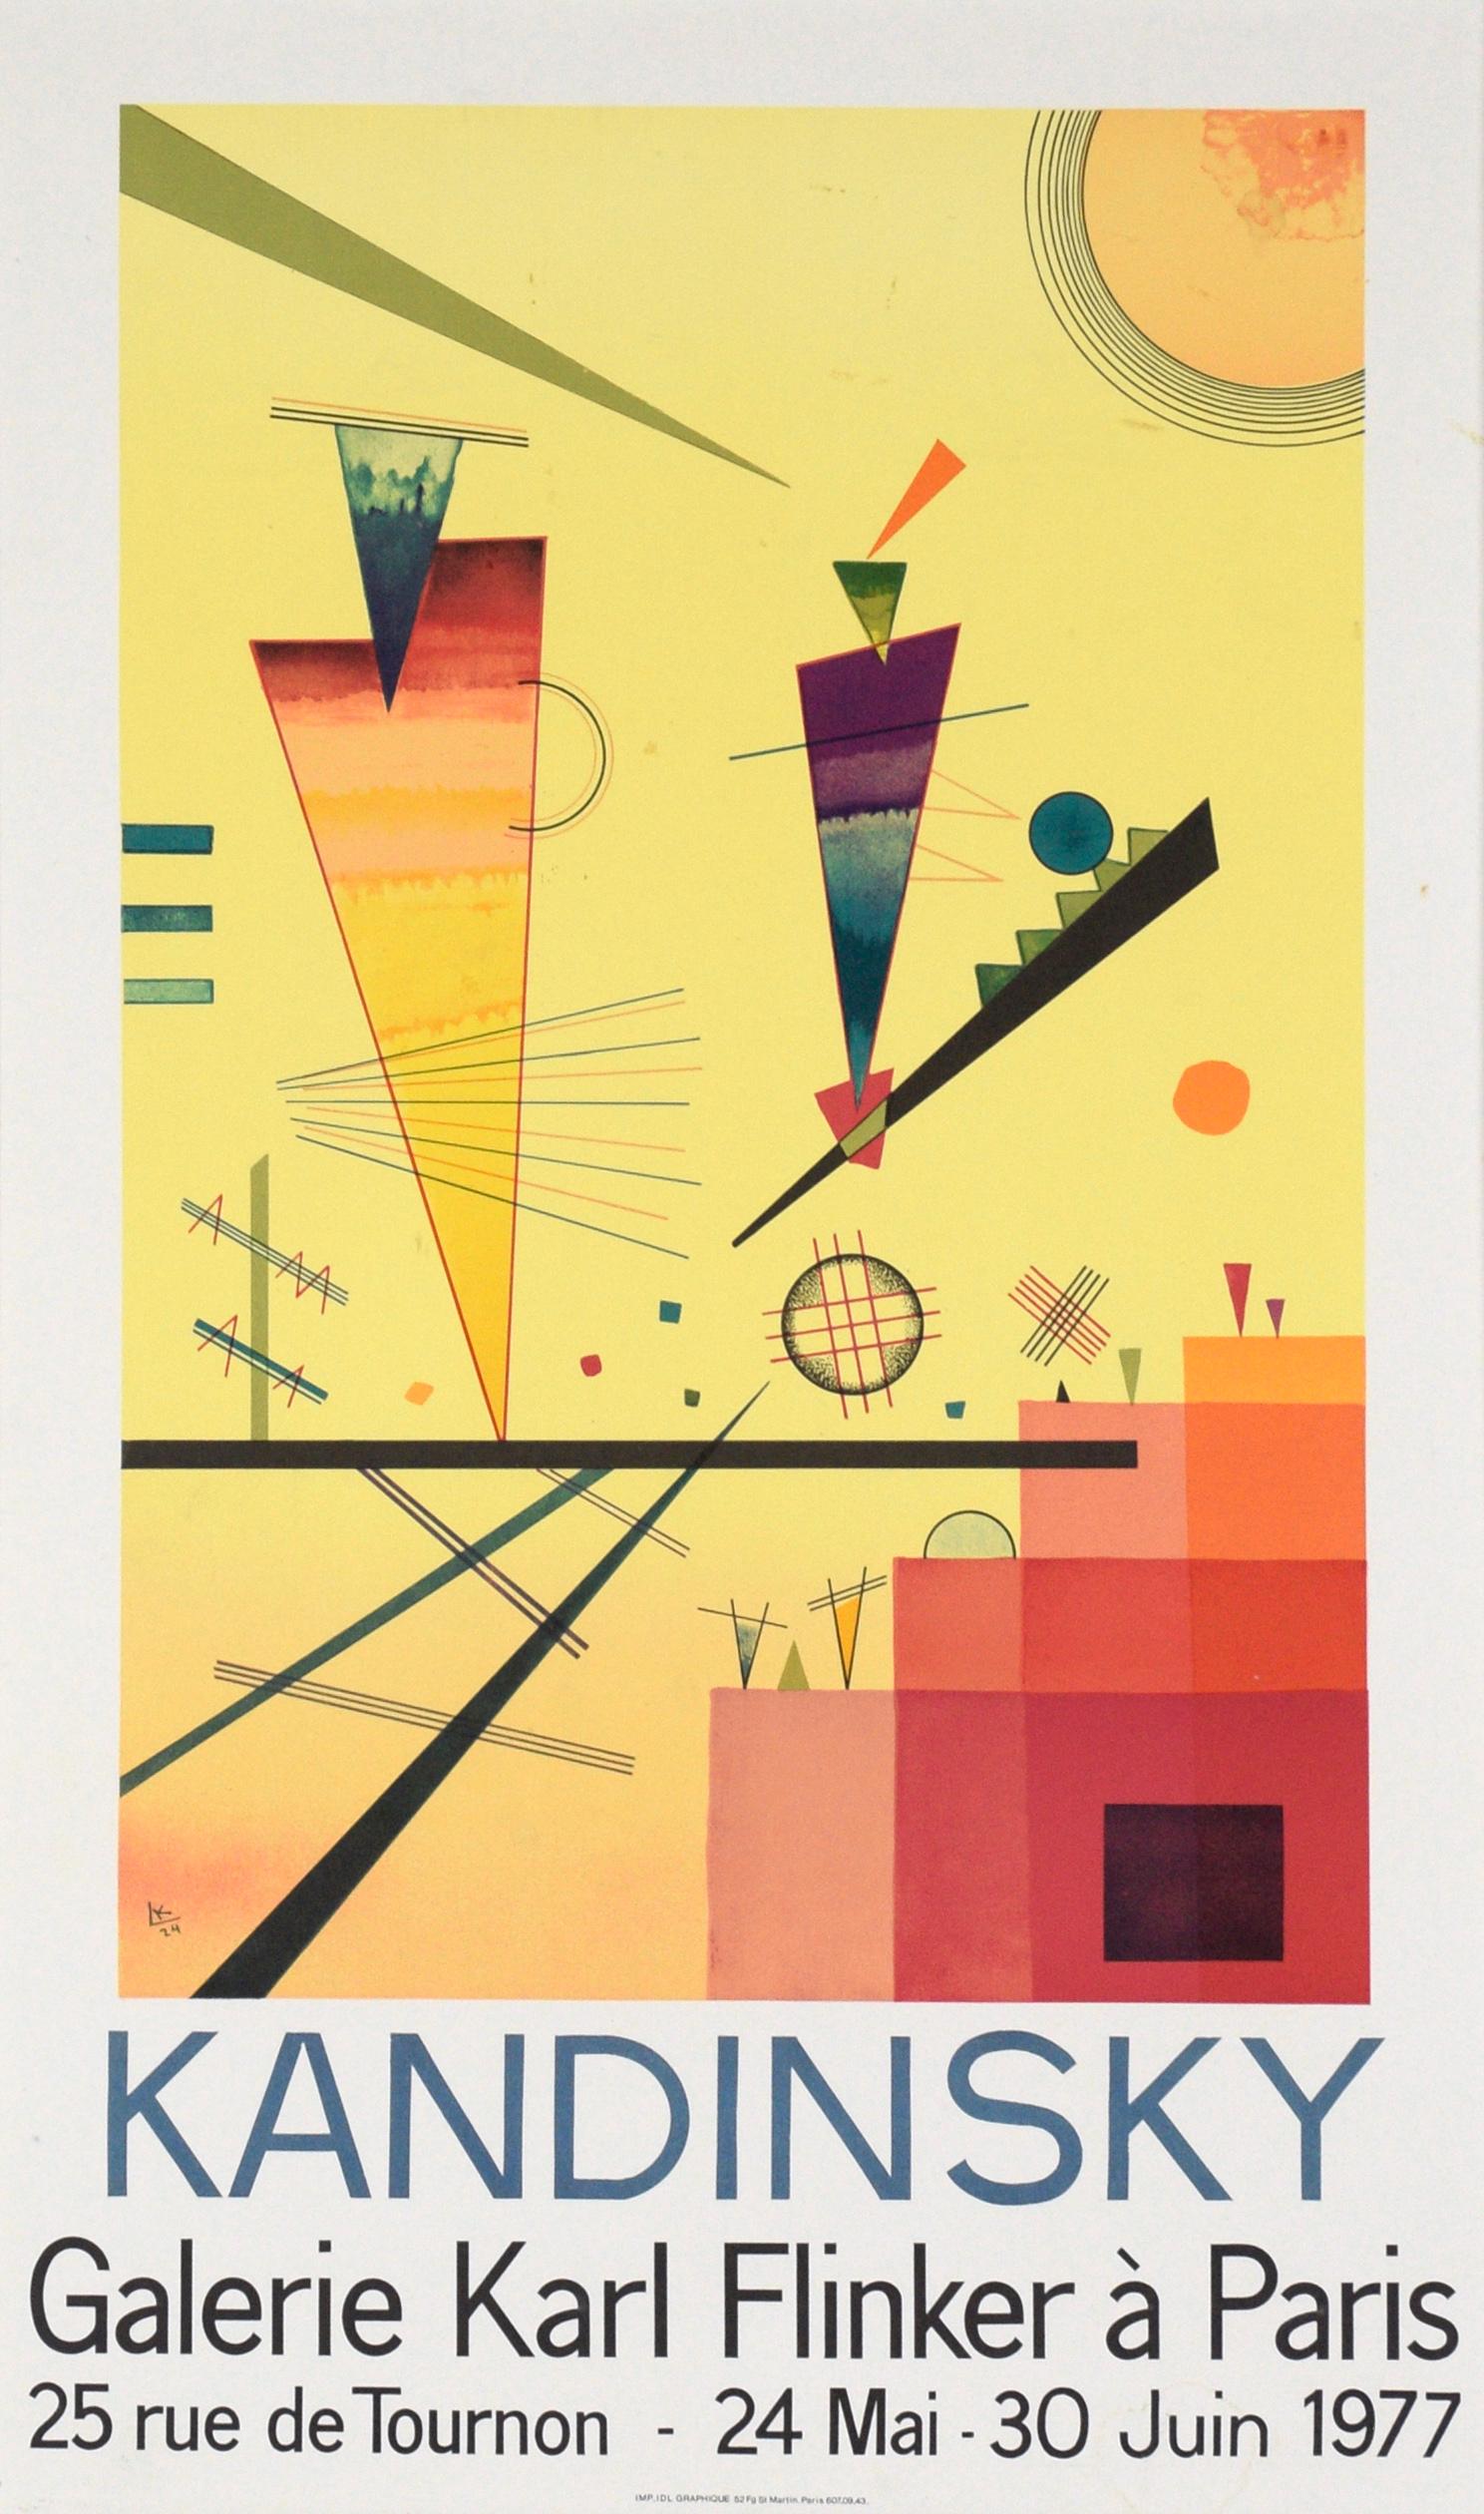 Exhibition Poster for Kandinsky at Galerie Karl Flinker 1977 in Ink on Paper - Abstract Geometric Print by Wassily Kandinsky